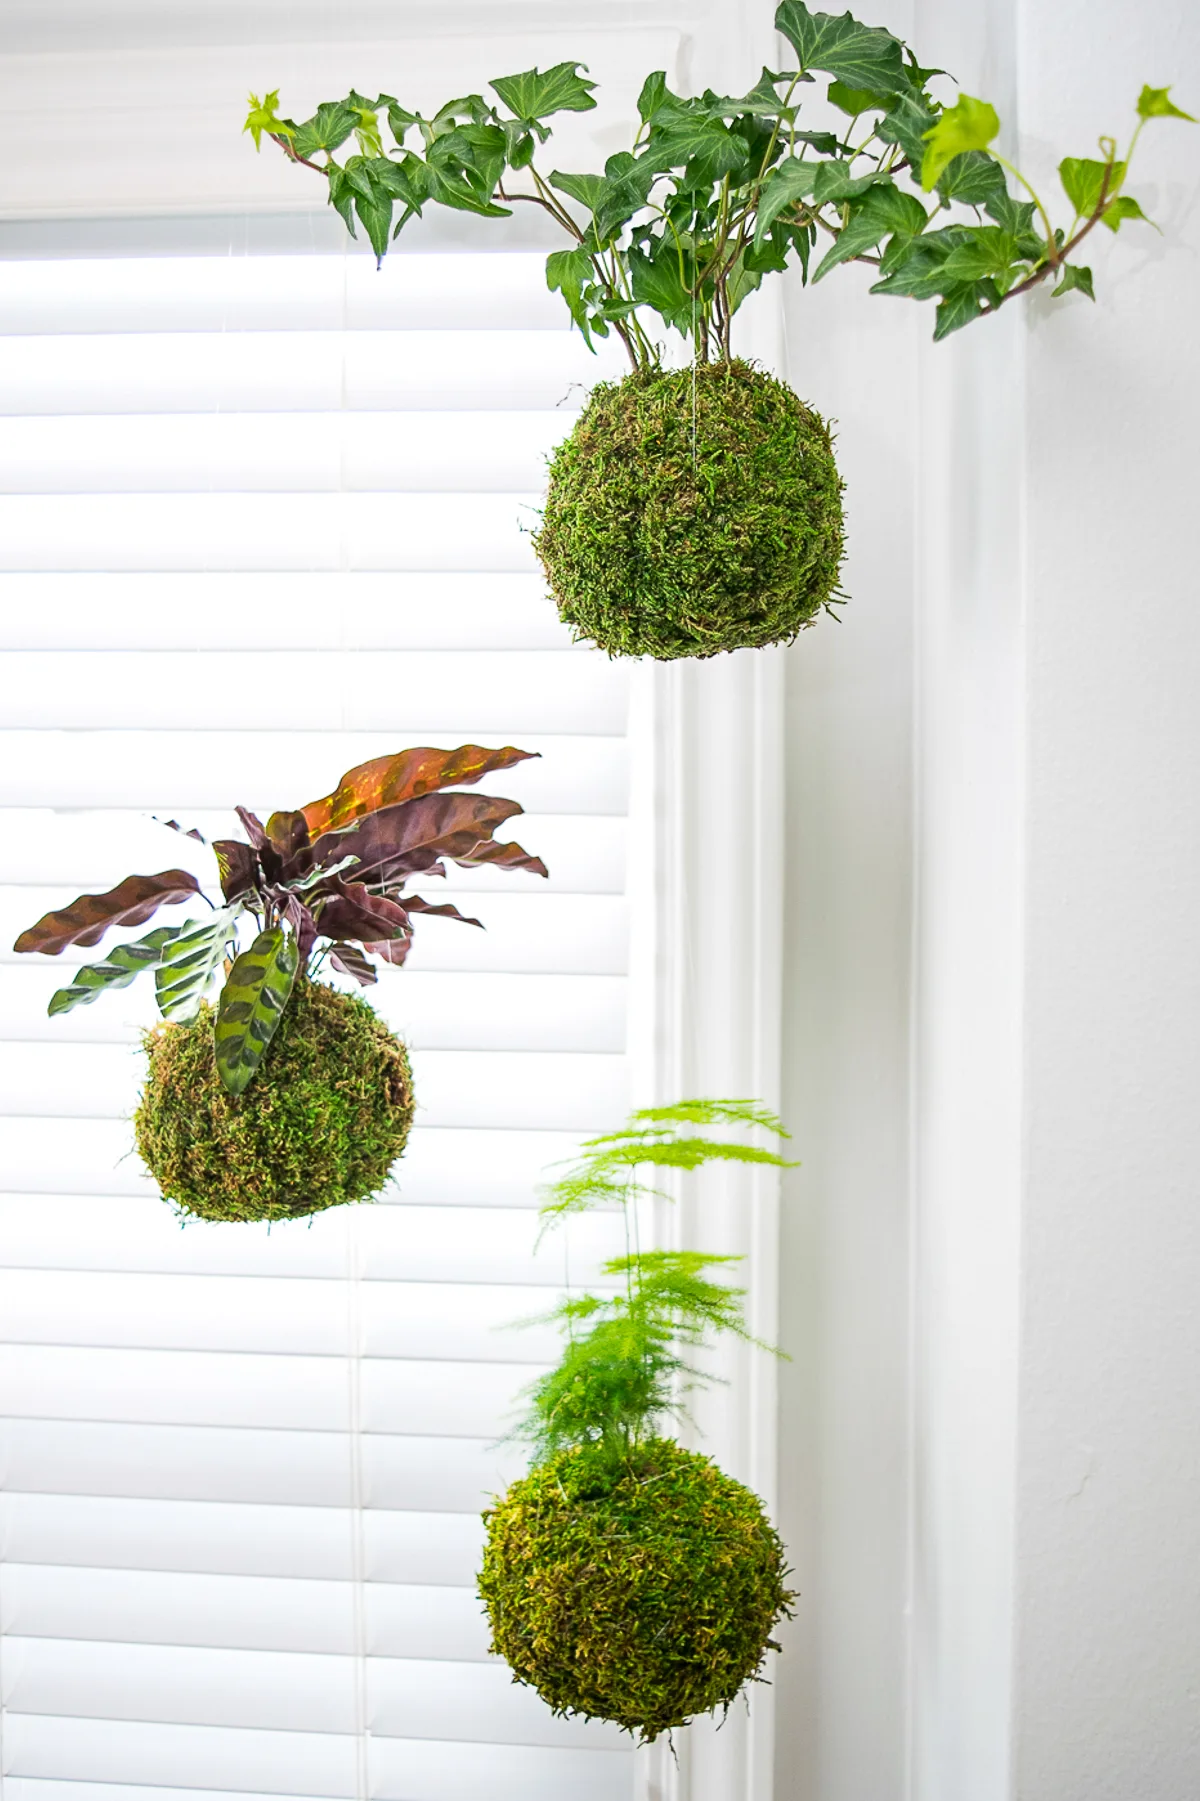 hanging moss ball planters in window with three different types of plants